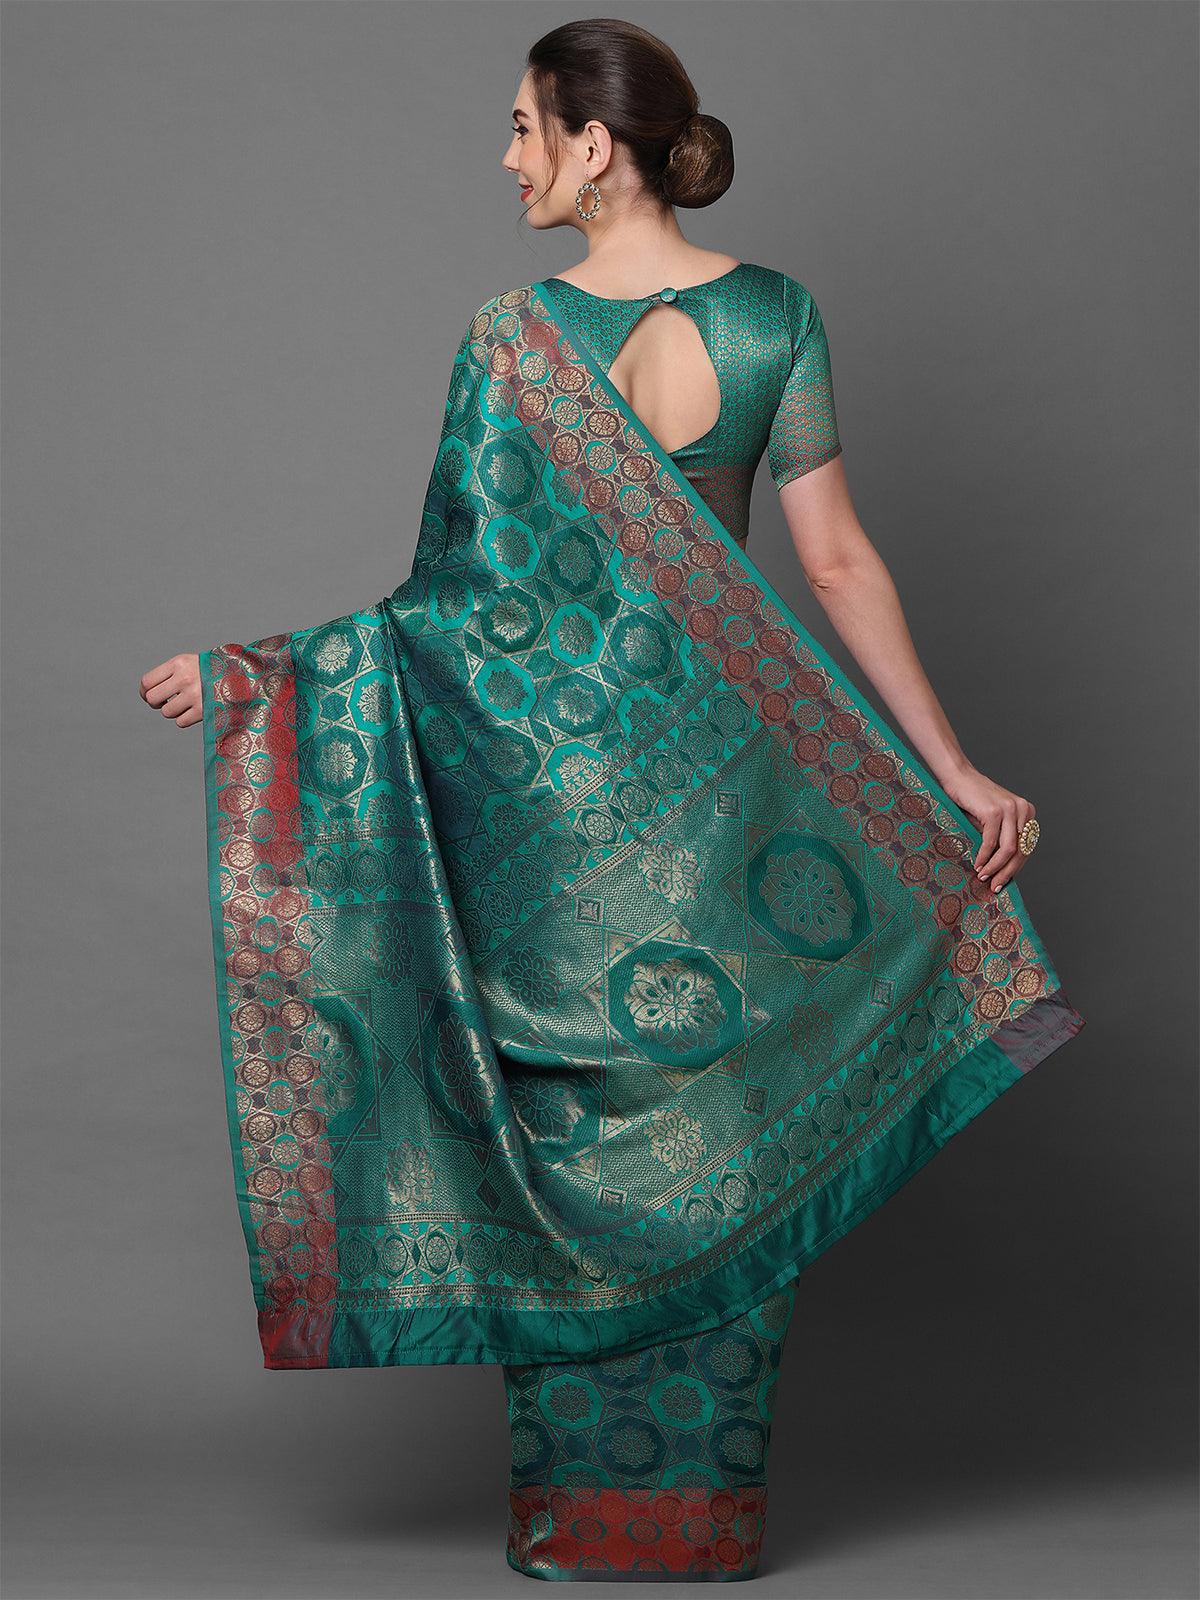 Teal Blue Party Wear Pure Satin Woven Design Saree With Unstitched Blouse - Odette